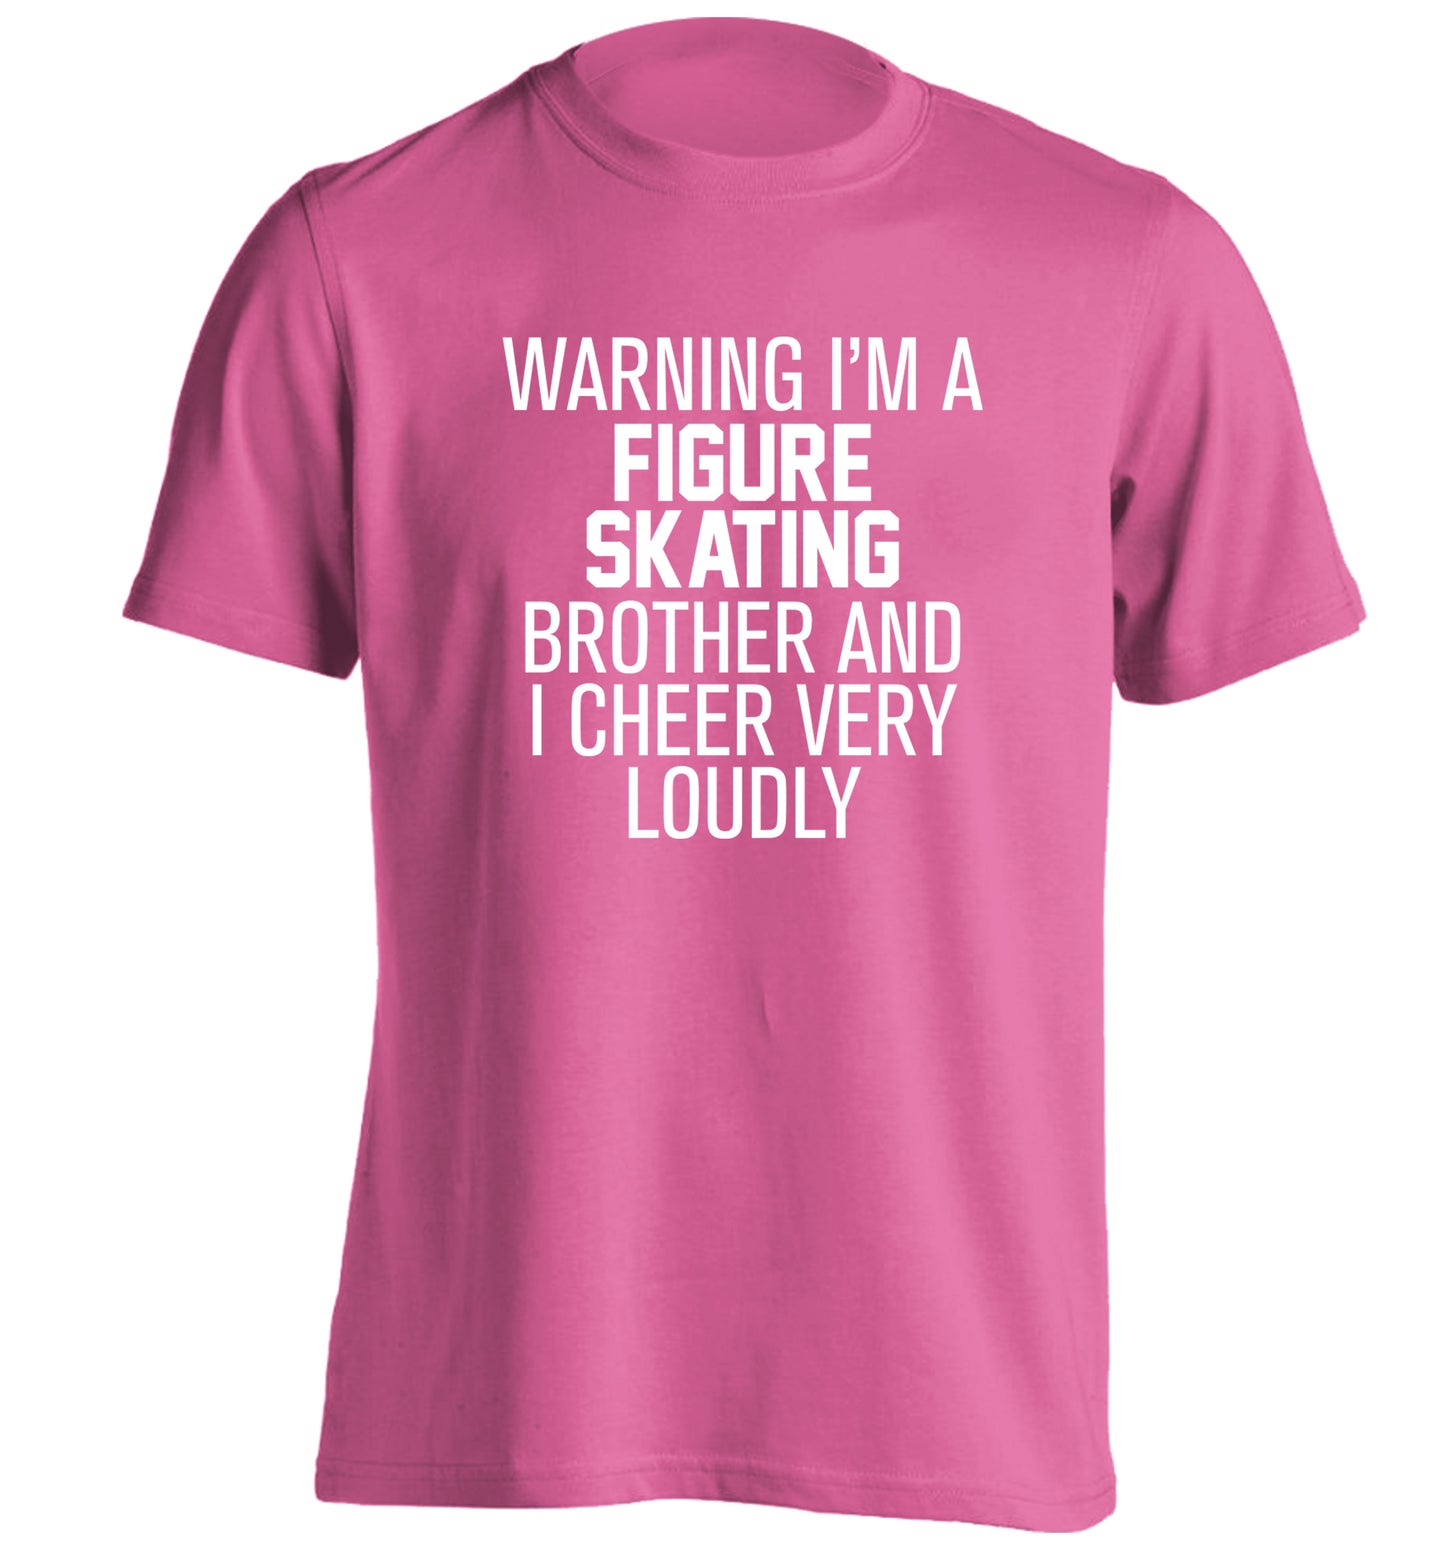 Warning I'm a figure skating brother and I cheer very loudly adults unisexpink Tshirt 2XL